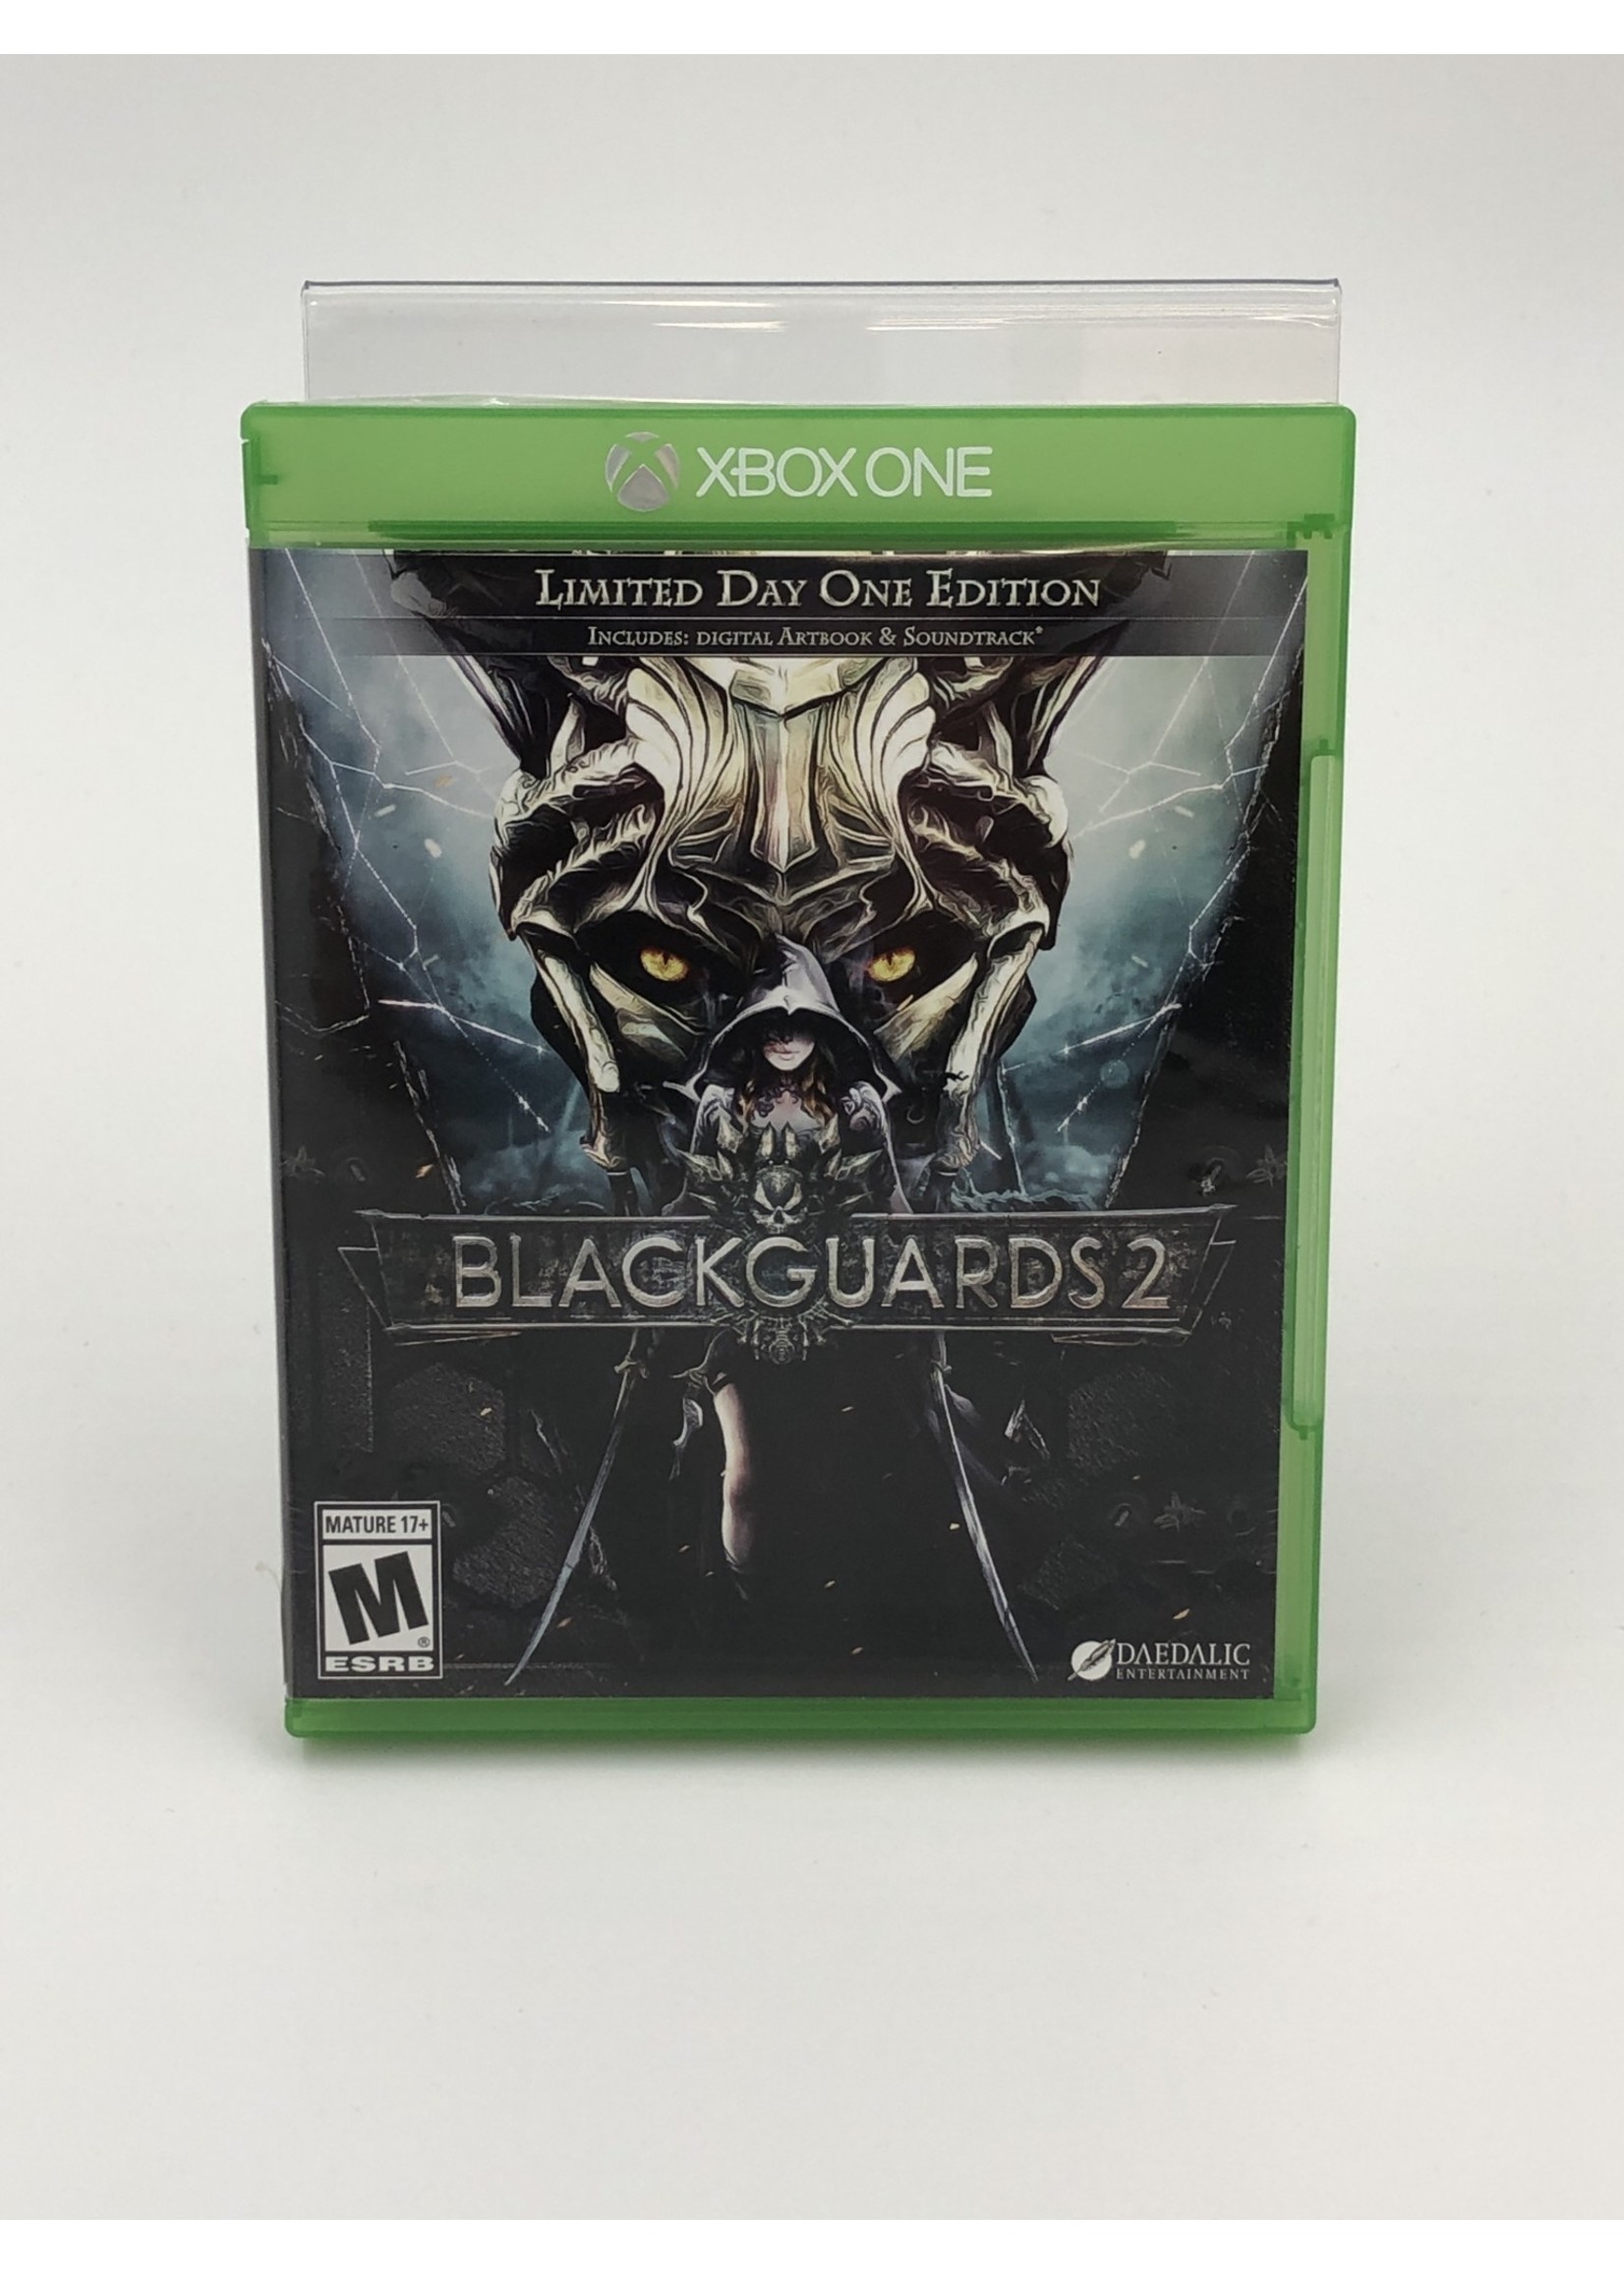 Xbox   Blackguards 2: Limited Day One Edition - Xbox One